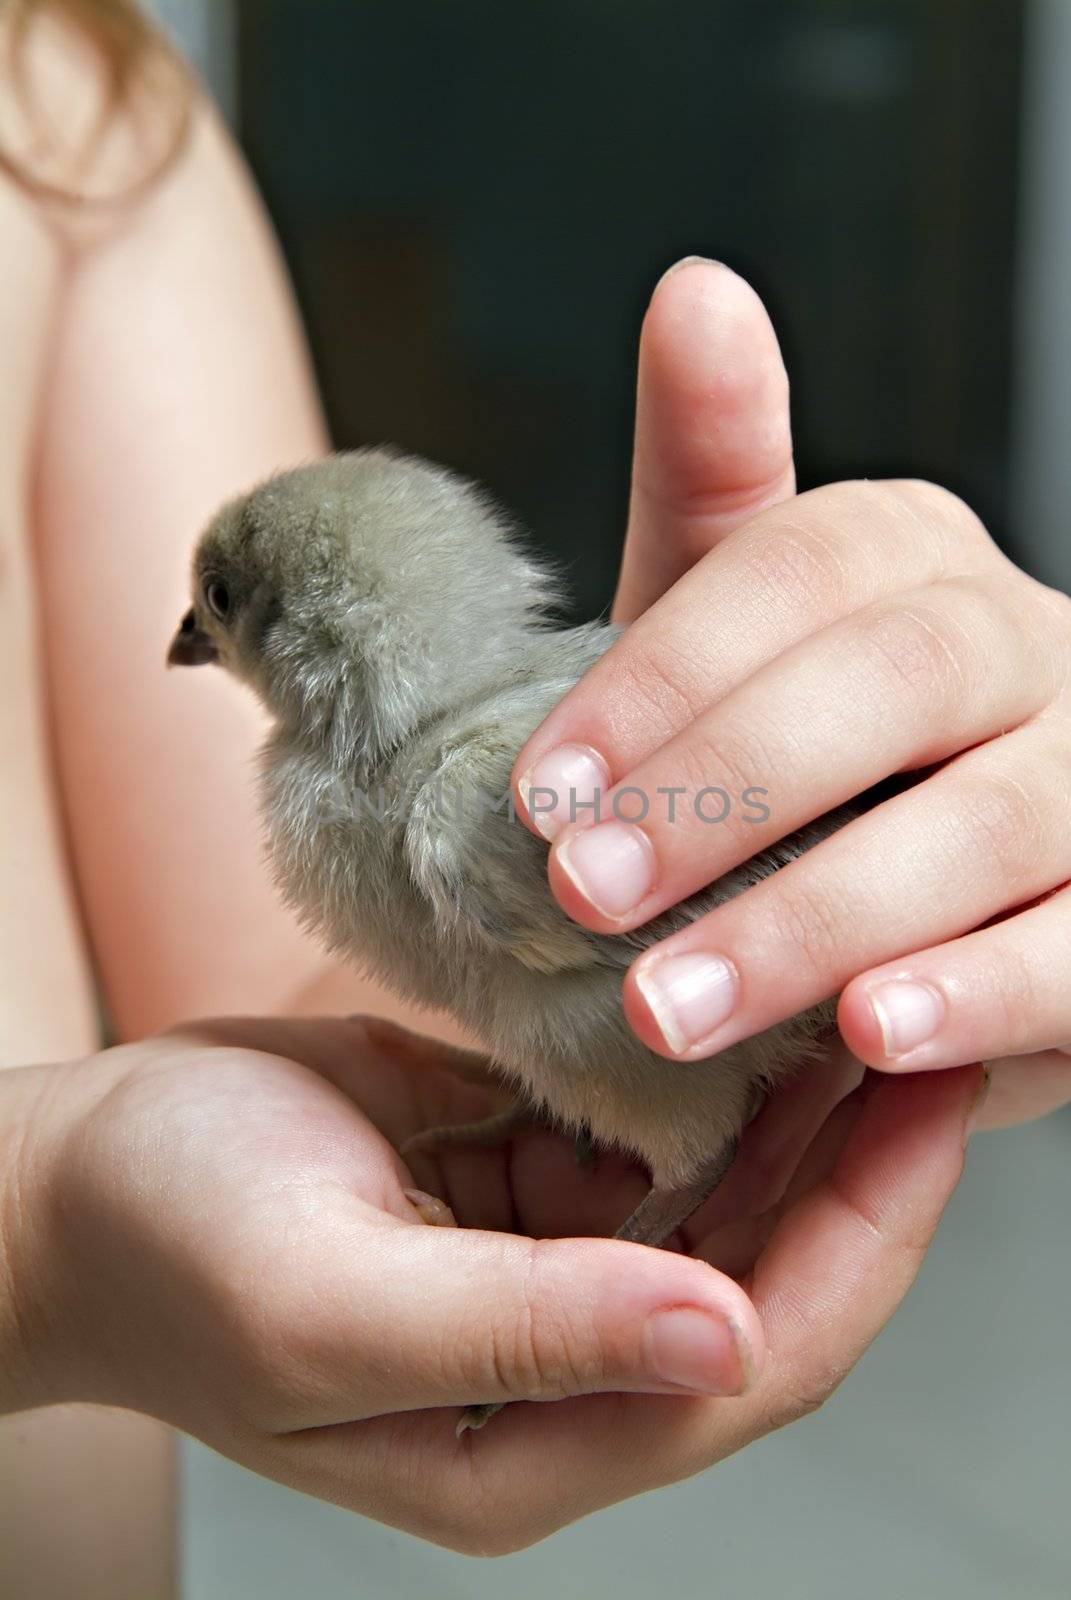 chick in child hand by noam